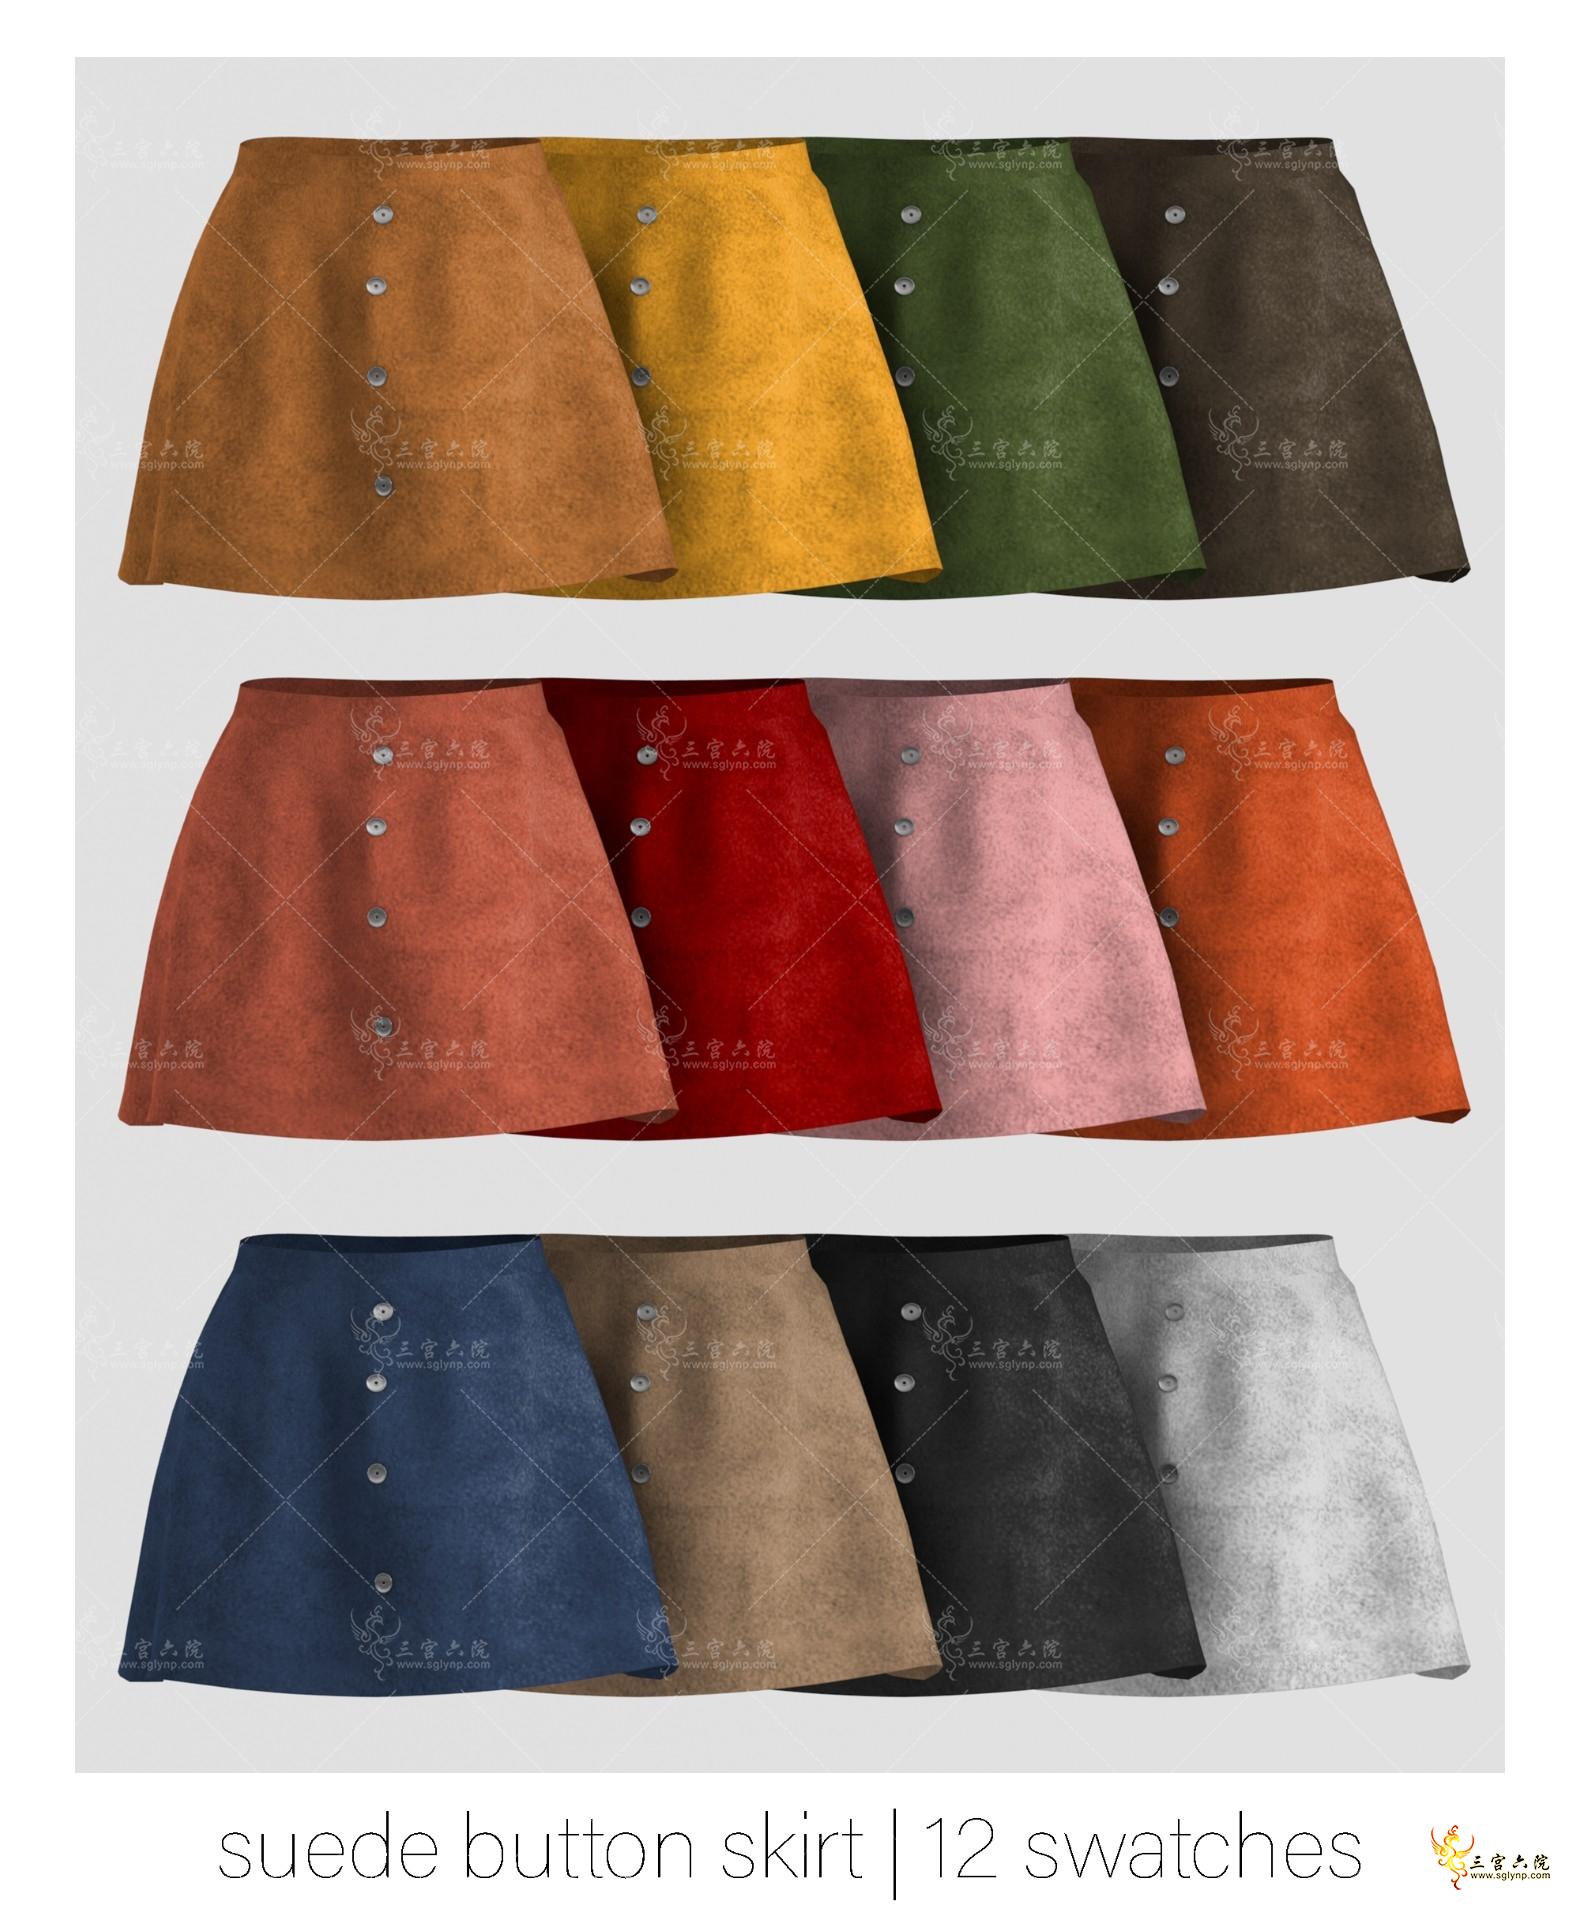 suedebuttonskirt_swatches.png